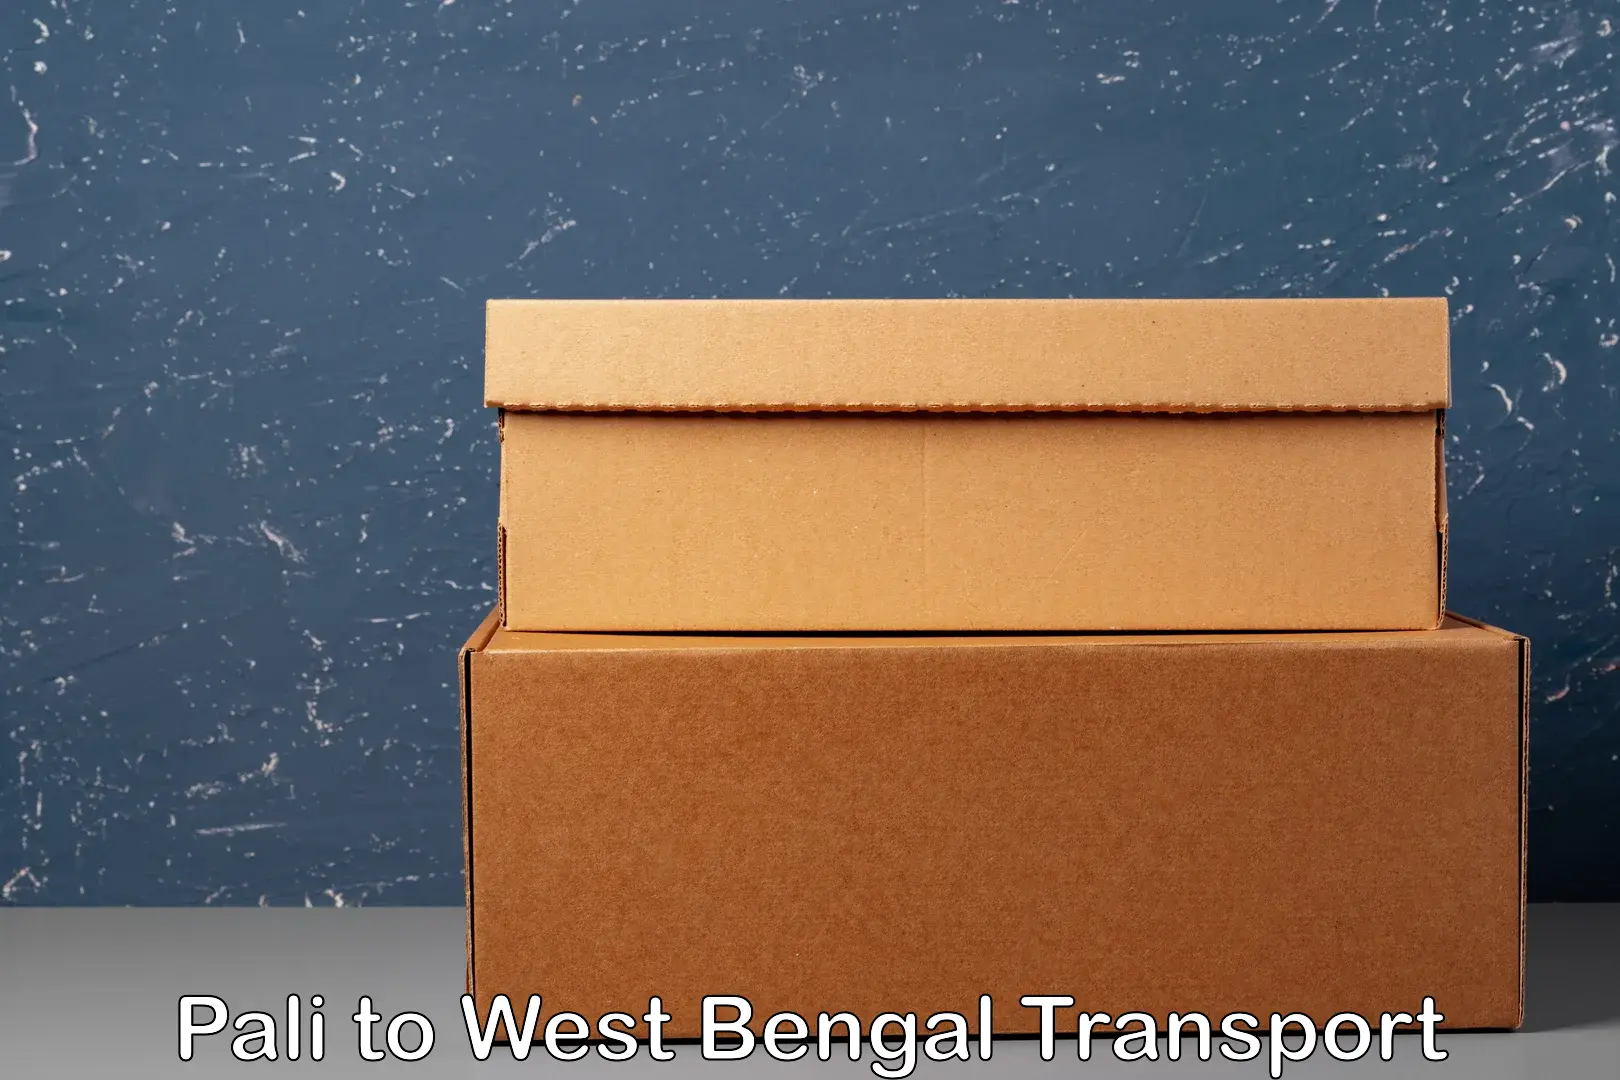 Furniture transport service Pali to West Bengal